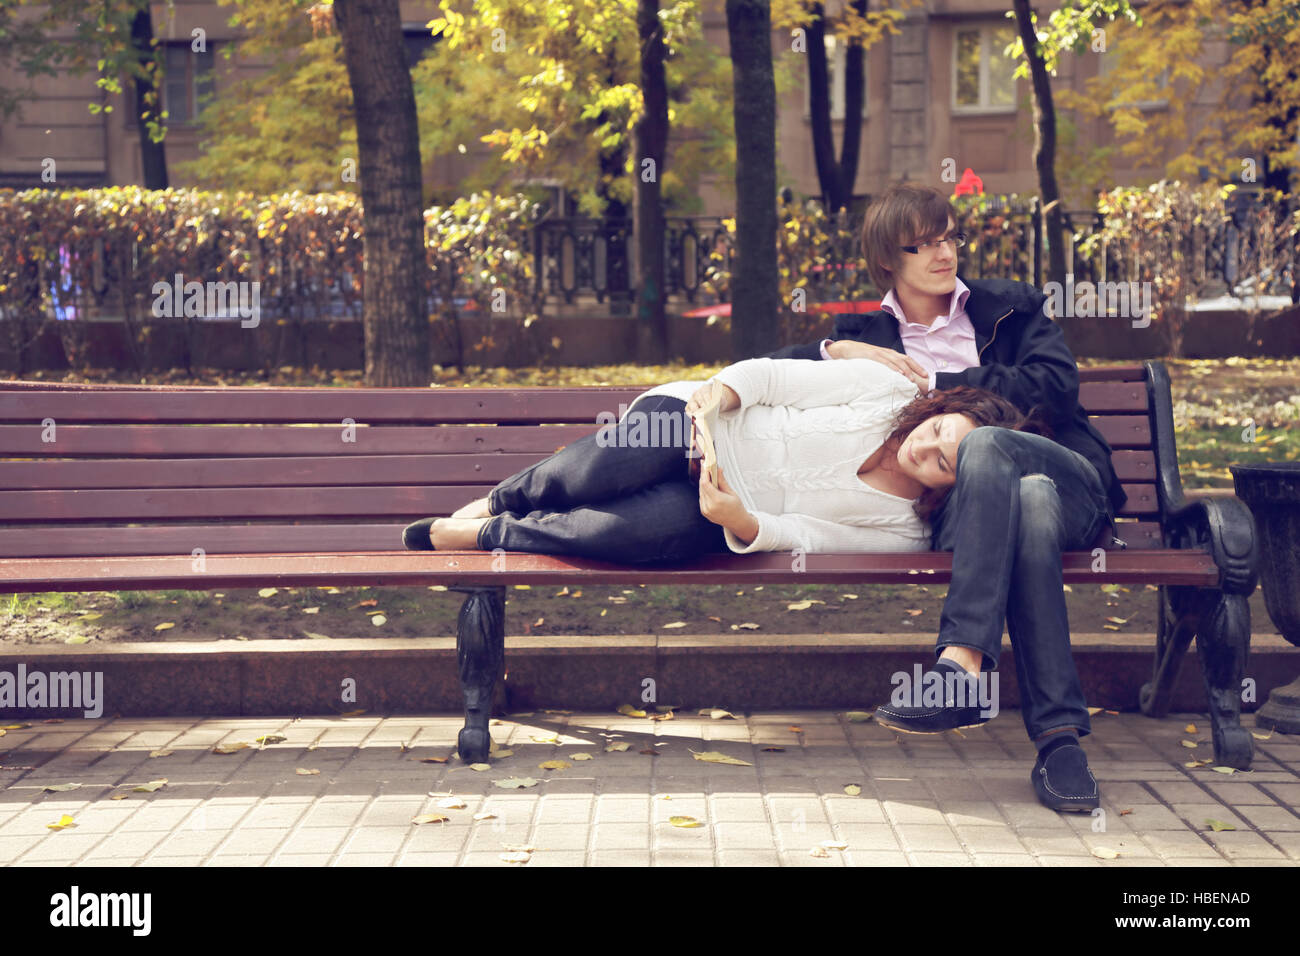 Couple on bench reading book Stock Photo